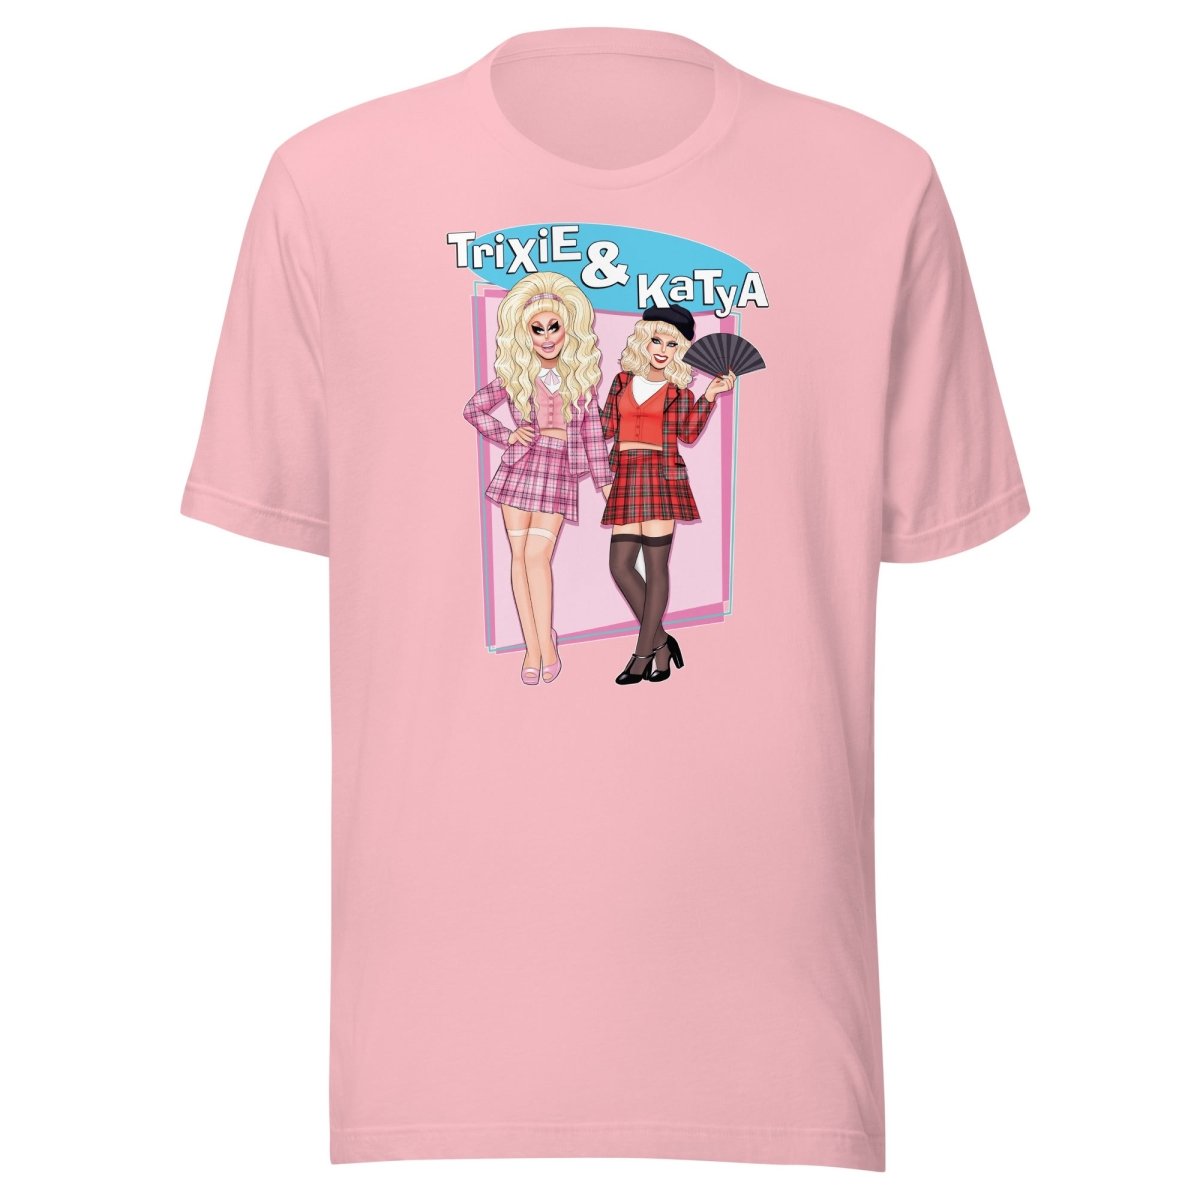 TRIXIE AND KATYA - Clueless T-Shirt – dragqueenmerch